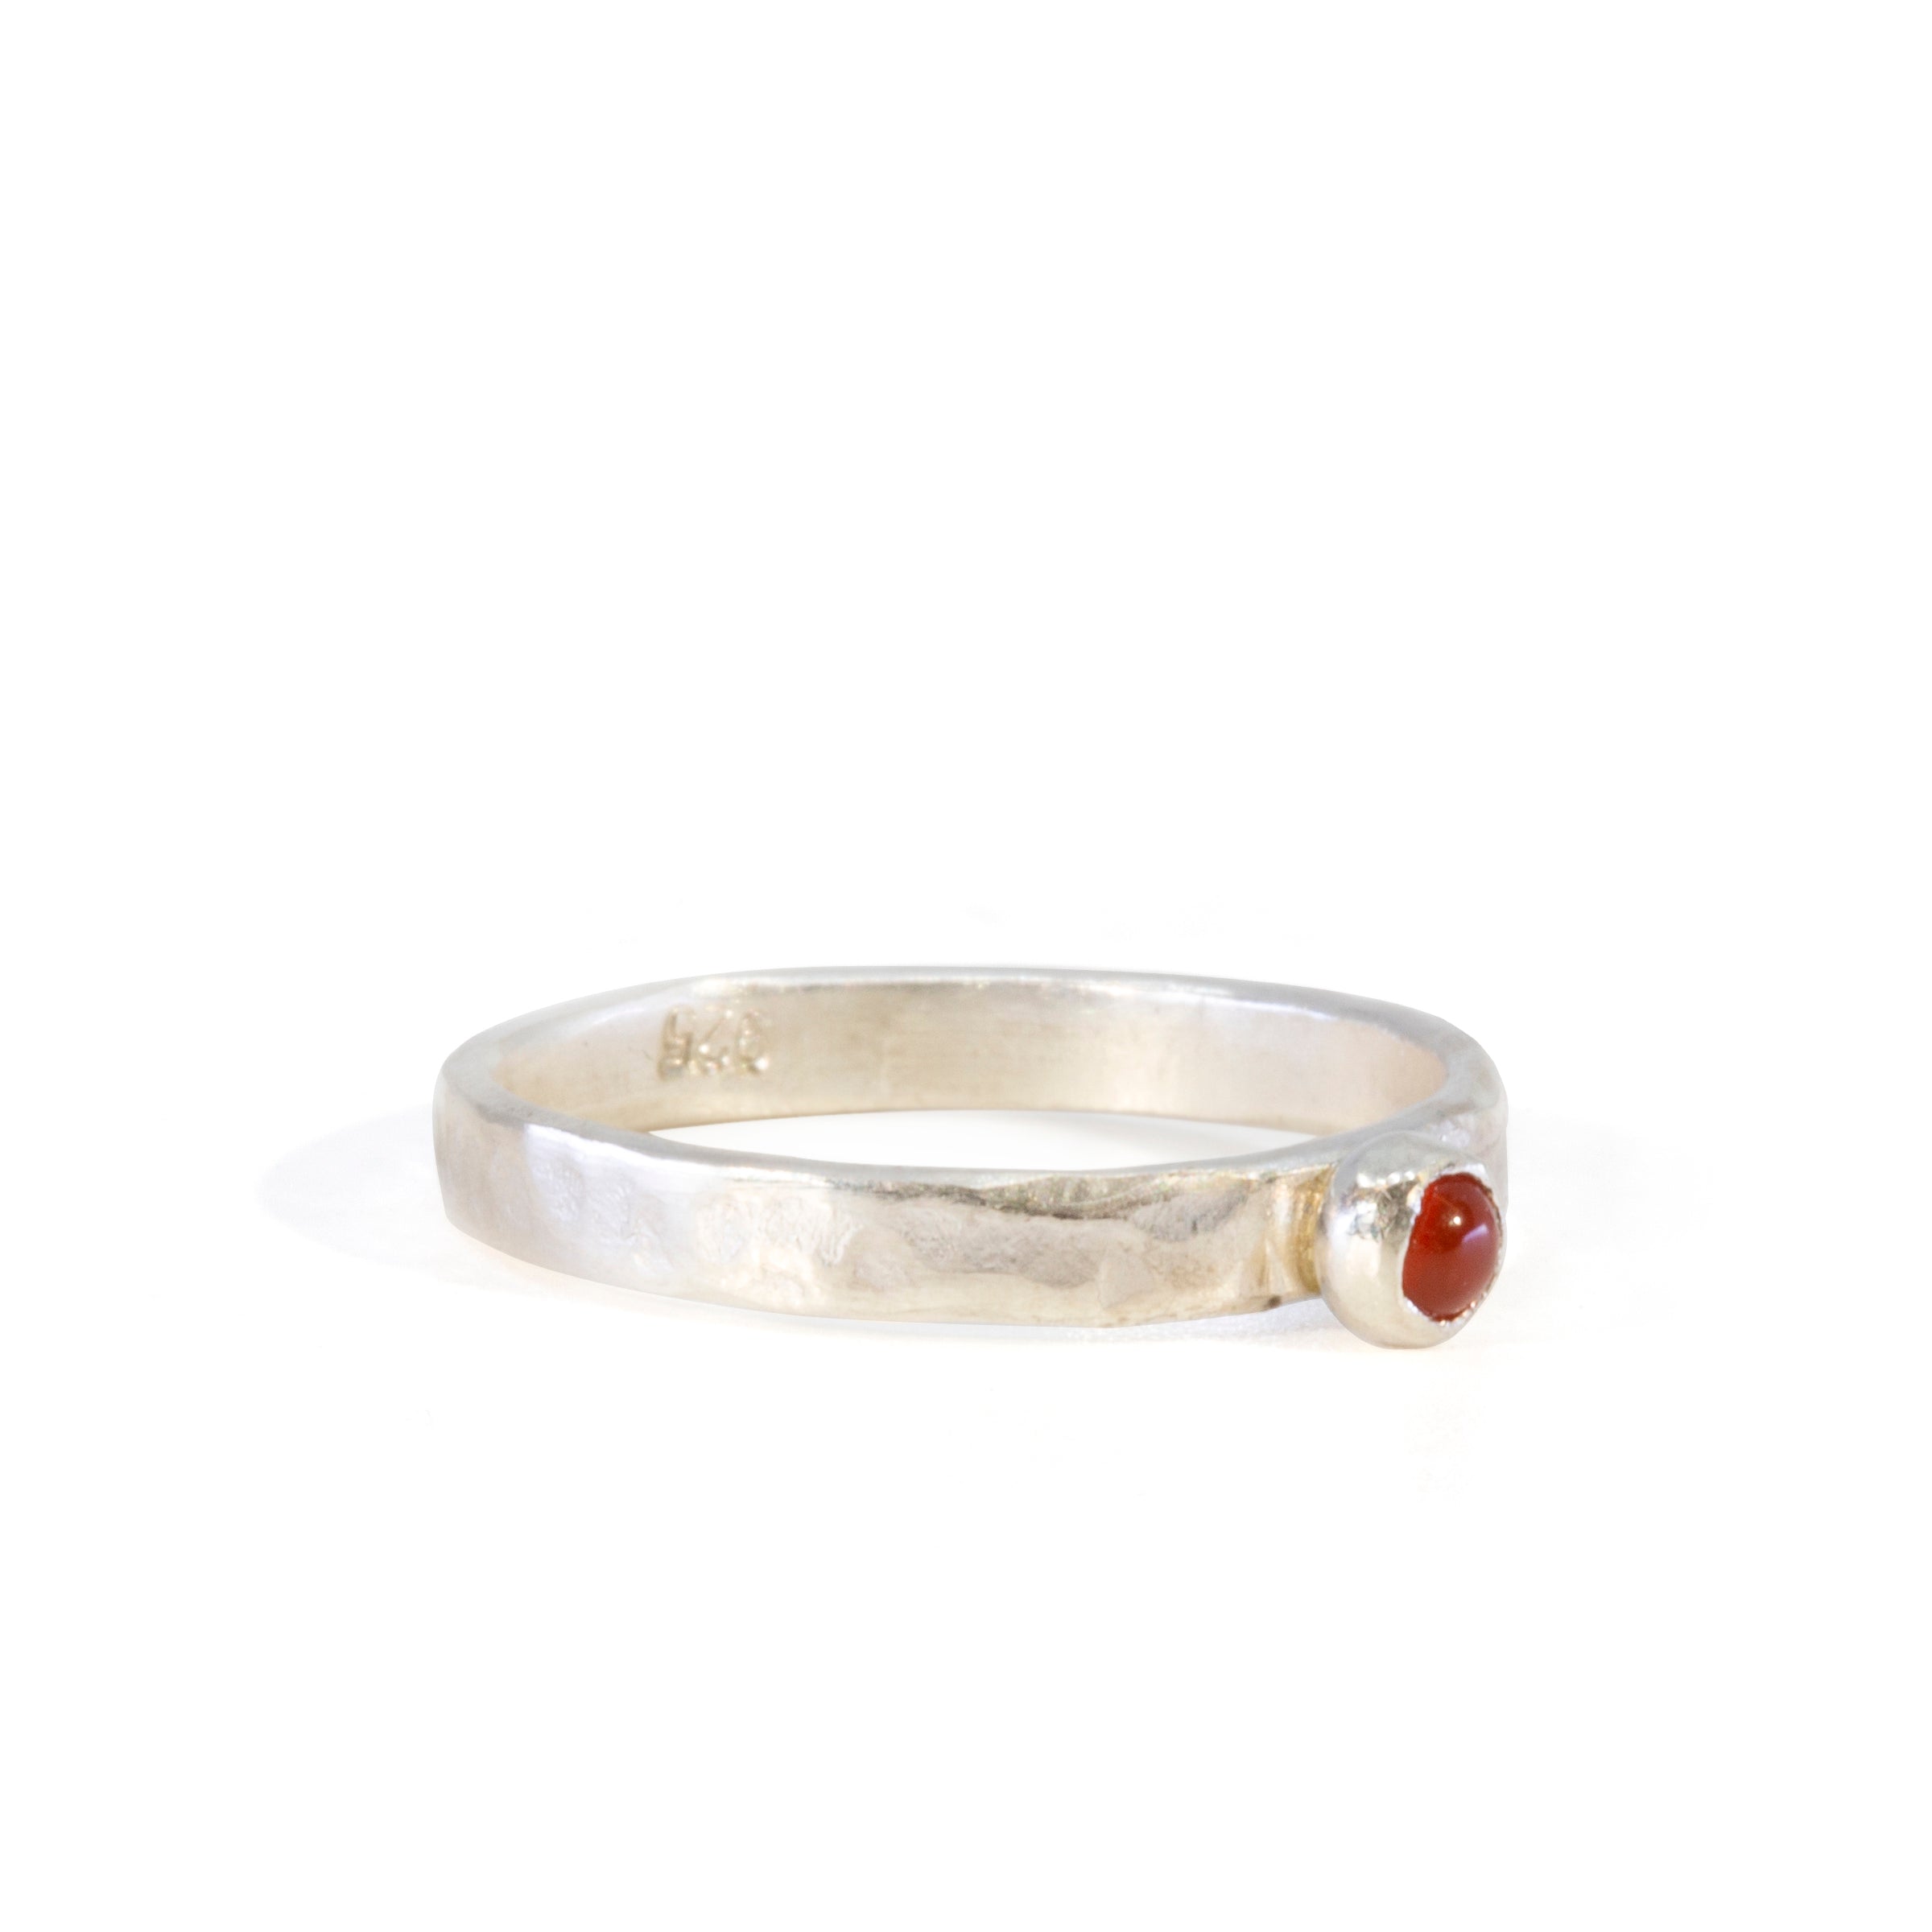 Carnelian Stackable Sterling Silver Handcrafted Ring - Ceci Greco Designs - JJW-124D - Crystalarium